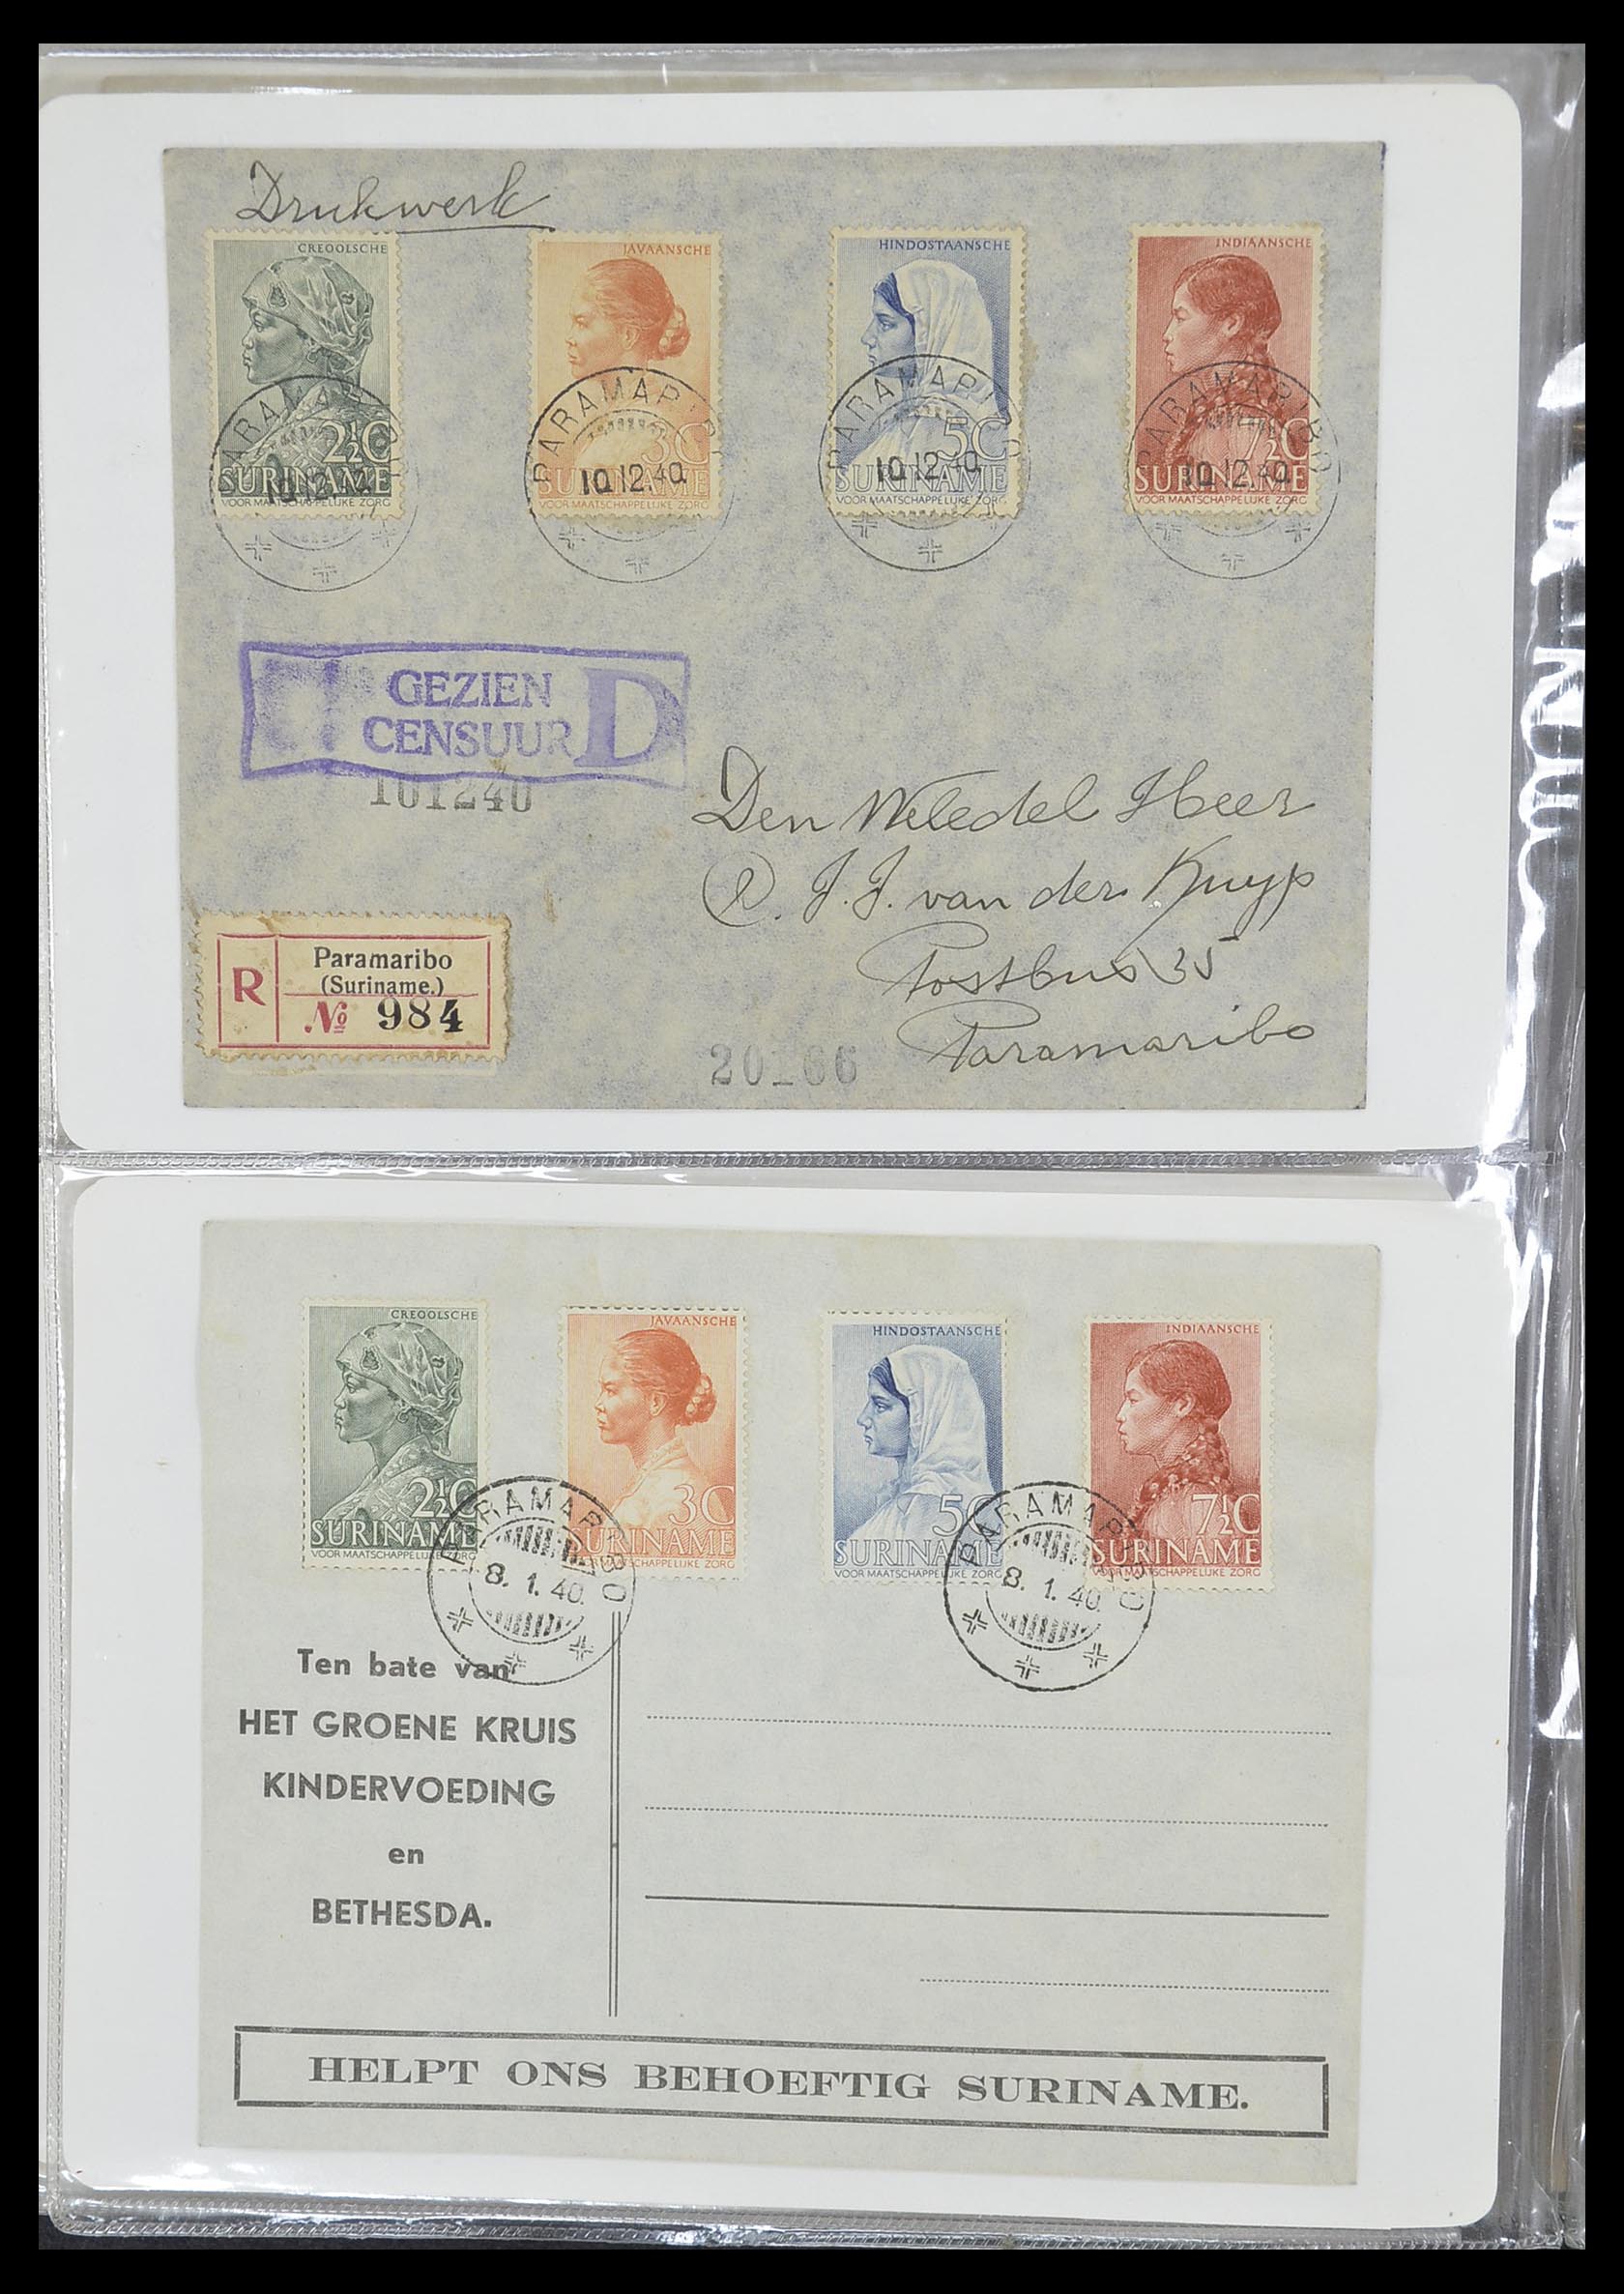 33333 040 - Stamp collection 33333 Dutch territories covers 1873-1959.